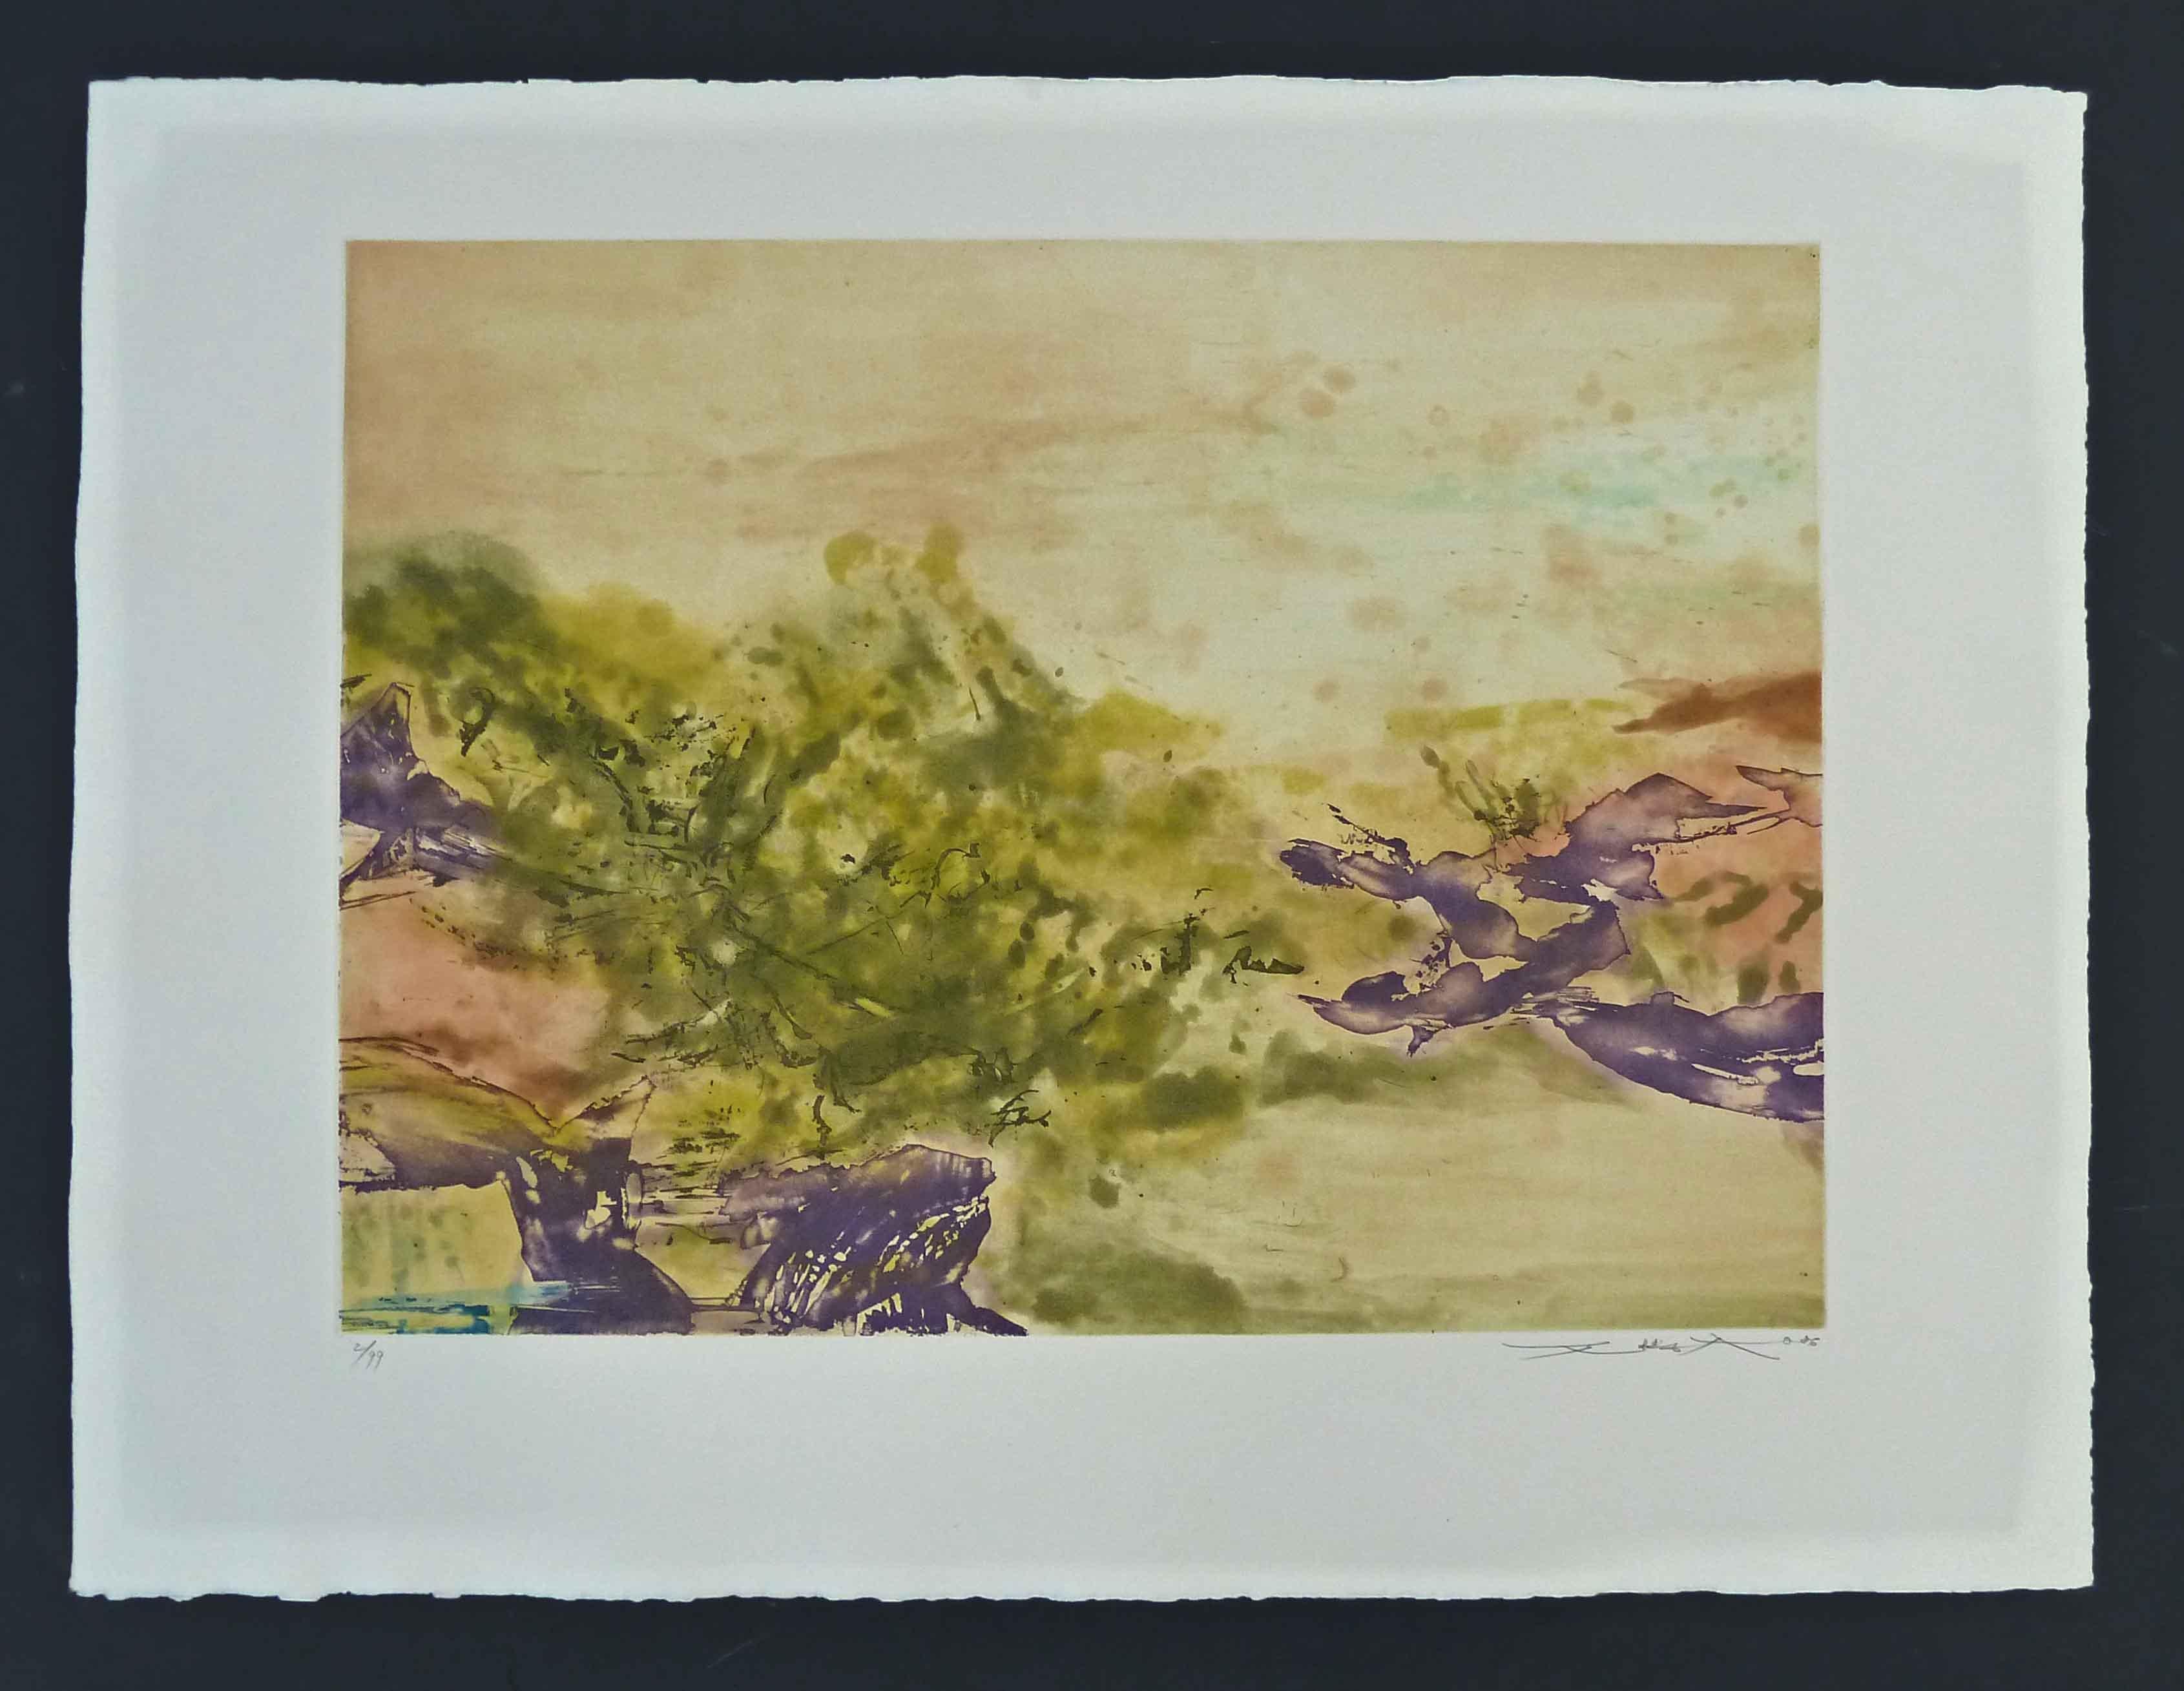  Etching No. 325 - Abstract  Chinese Art French Heritage - Print by Zao Wou-Ki